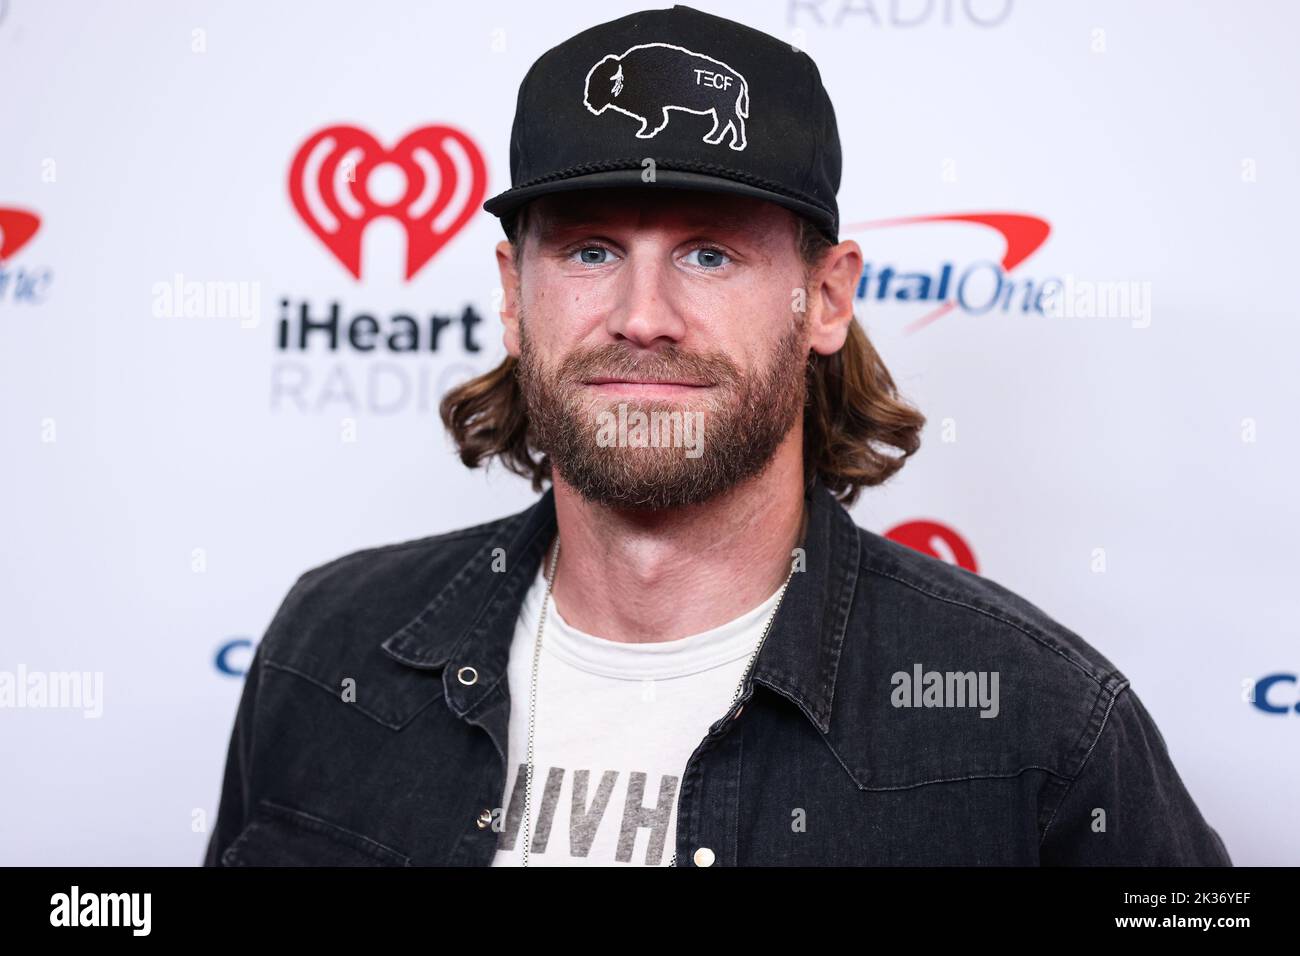 LAS VEGAS, NEVADA, USA - SEPTEMBER 24: Chase Rice poses in the press room at the 2022 iHeartRadio Music Festival - Night 2 held at the T-Mobile Arena on September 24, 2022 in Las Vegas, Nevada, United States. (Photo by Xavier Collin/Image Press Agency) Stock Photo